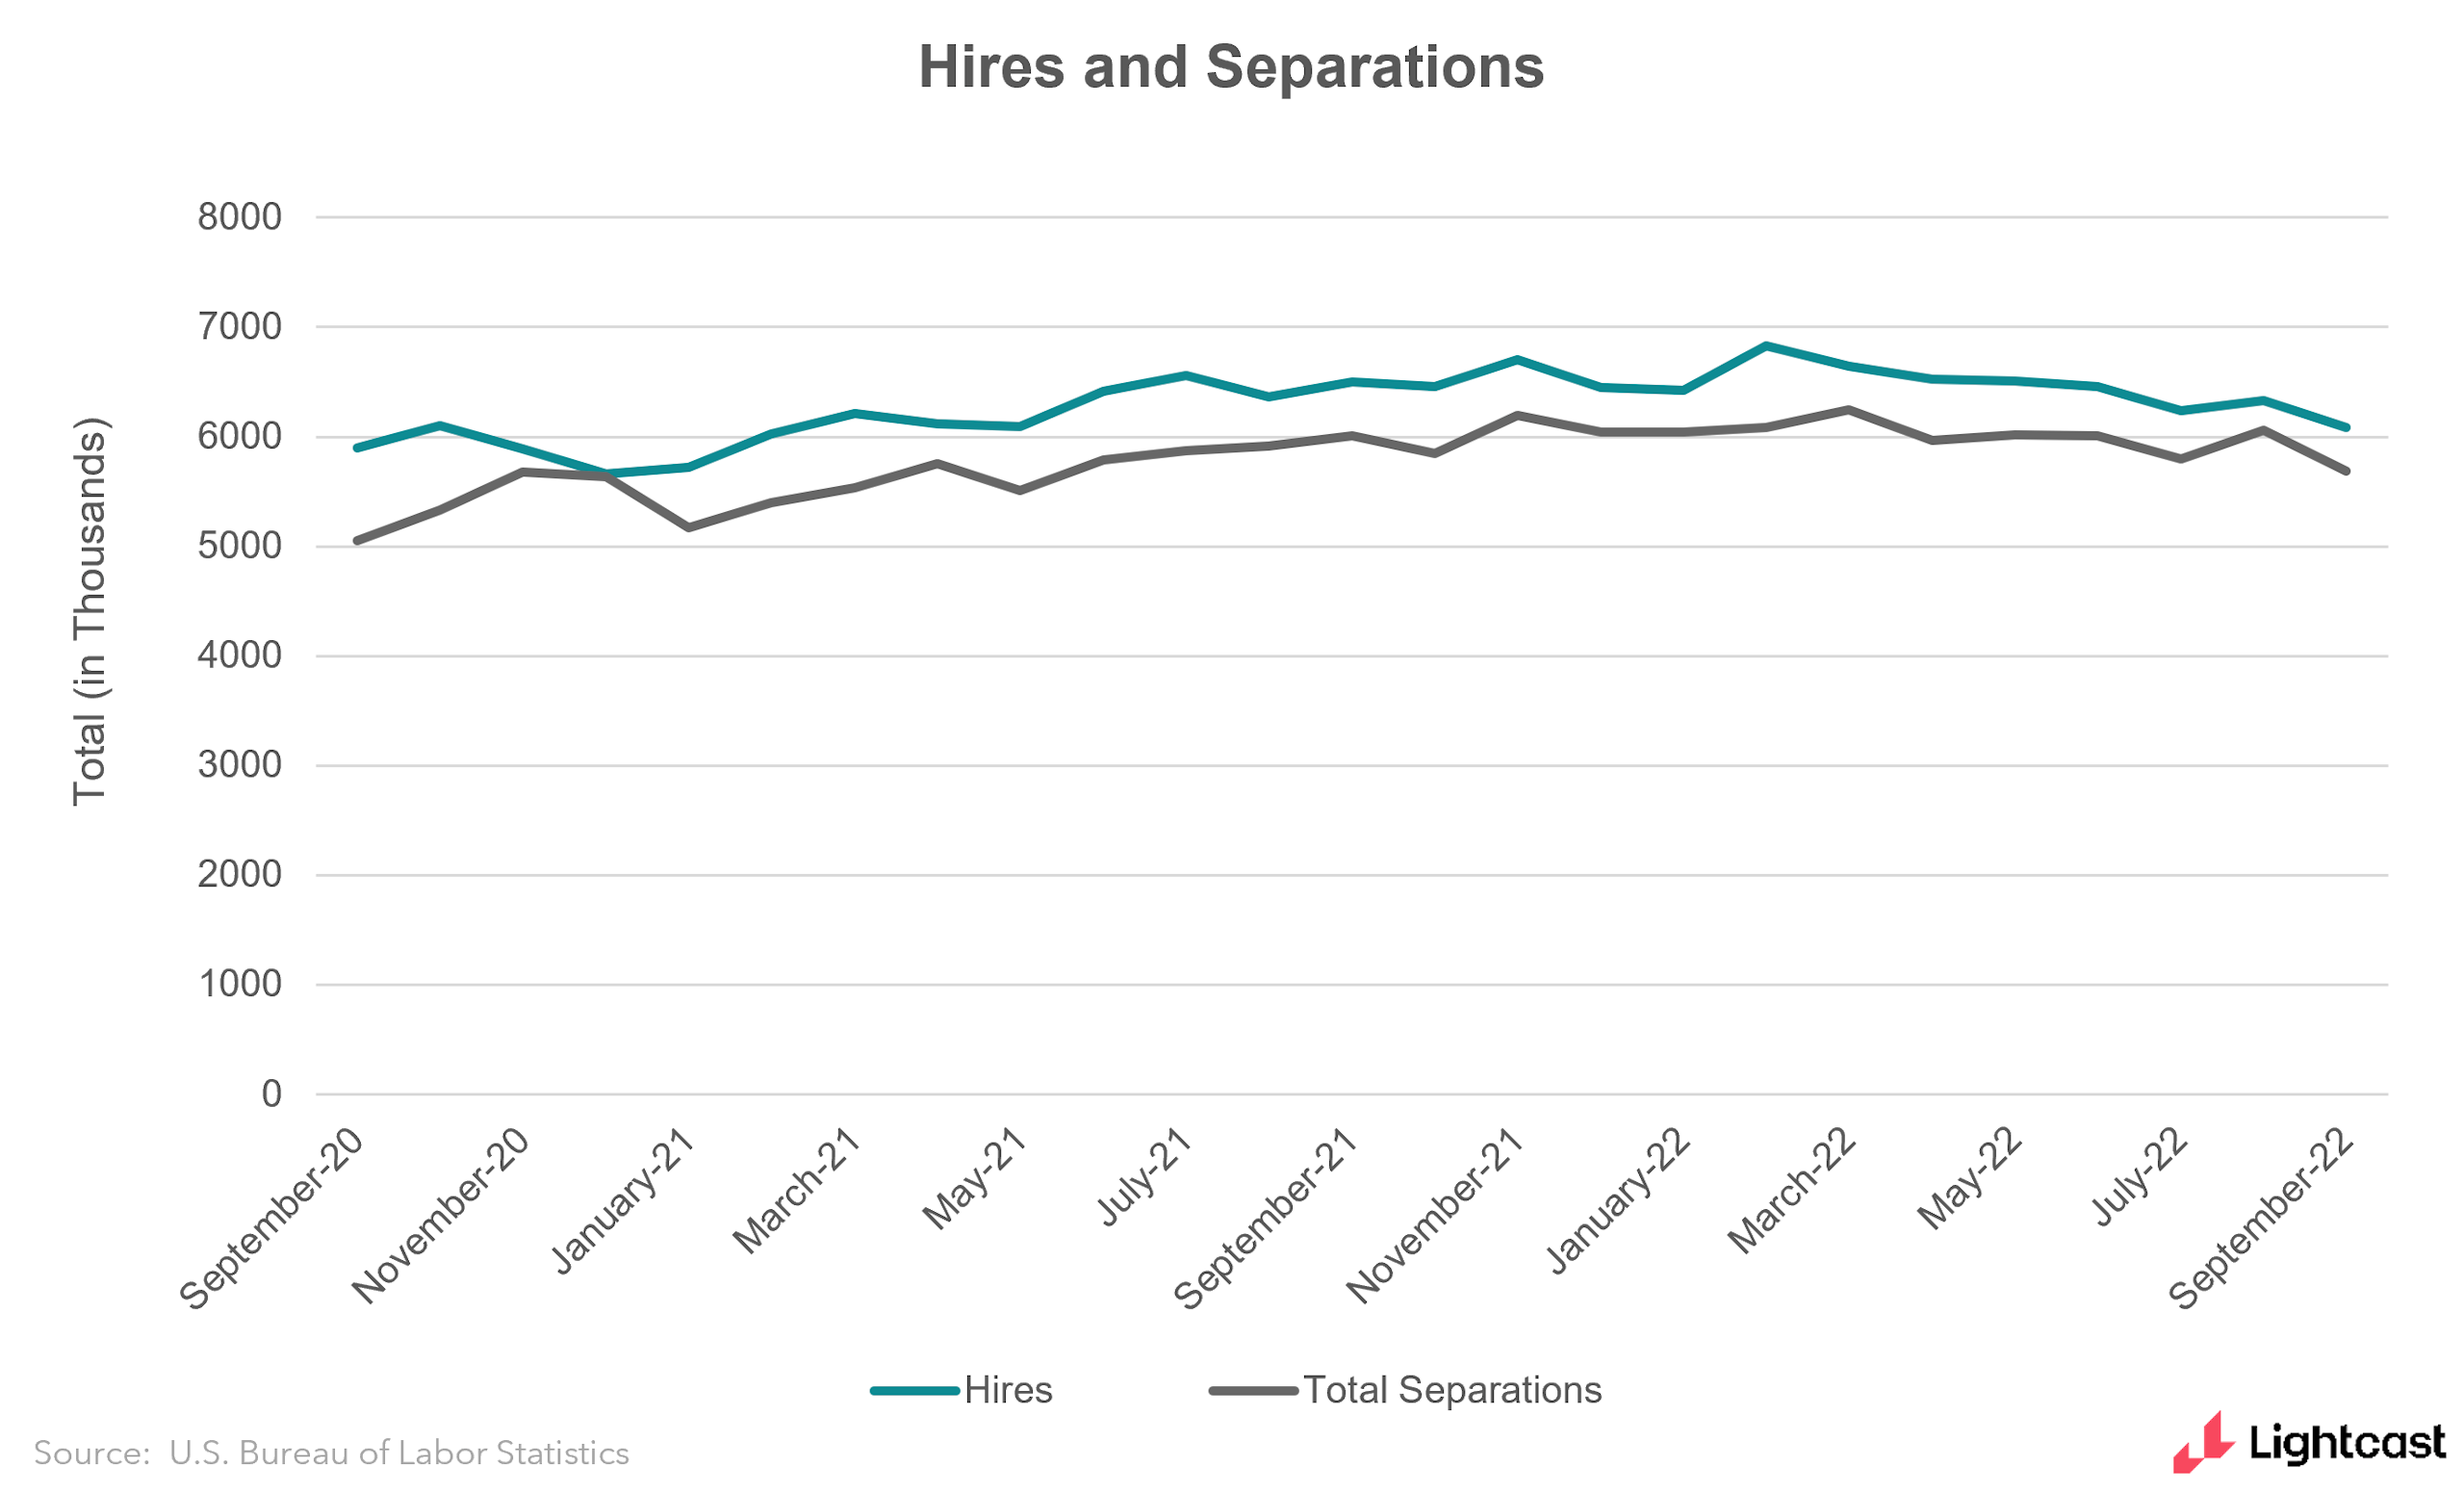 hires and separations over time, ticking slightly down